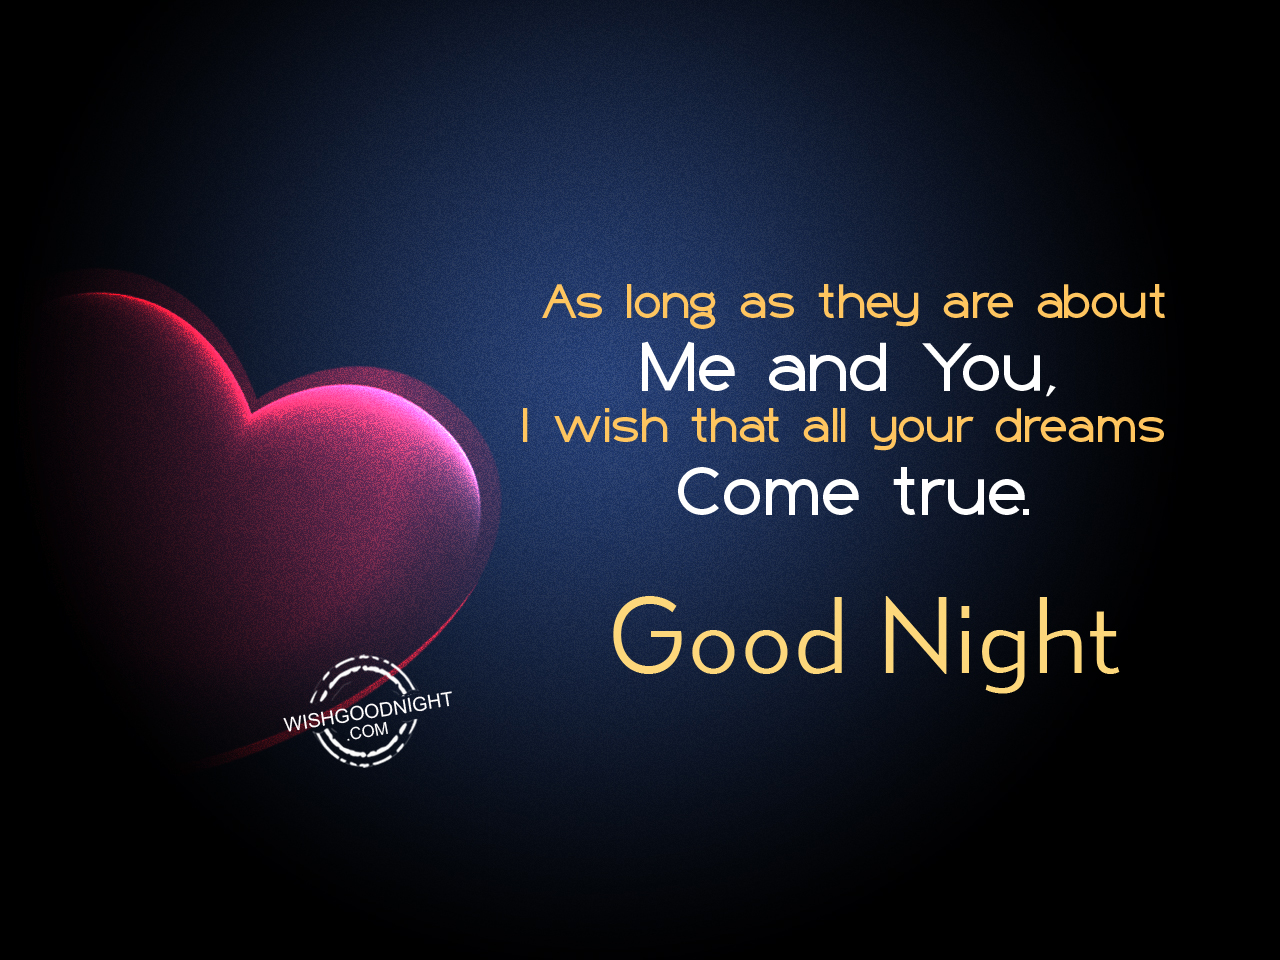 Let me wish you. Good Night Wishes. I Wish you good Night. Wishing good Night. Good Night i Love you.